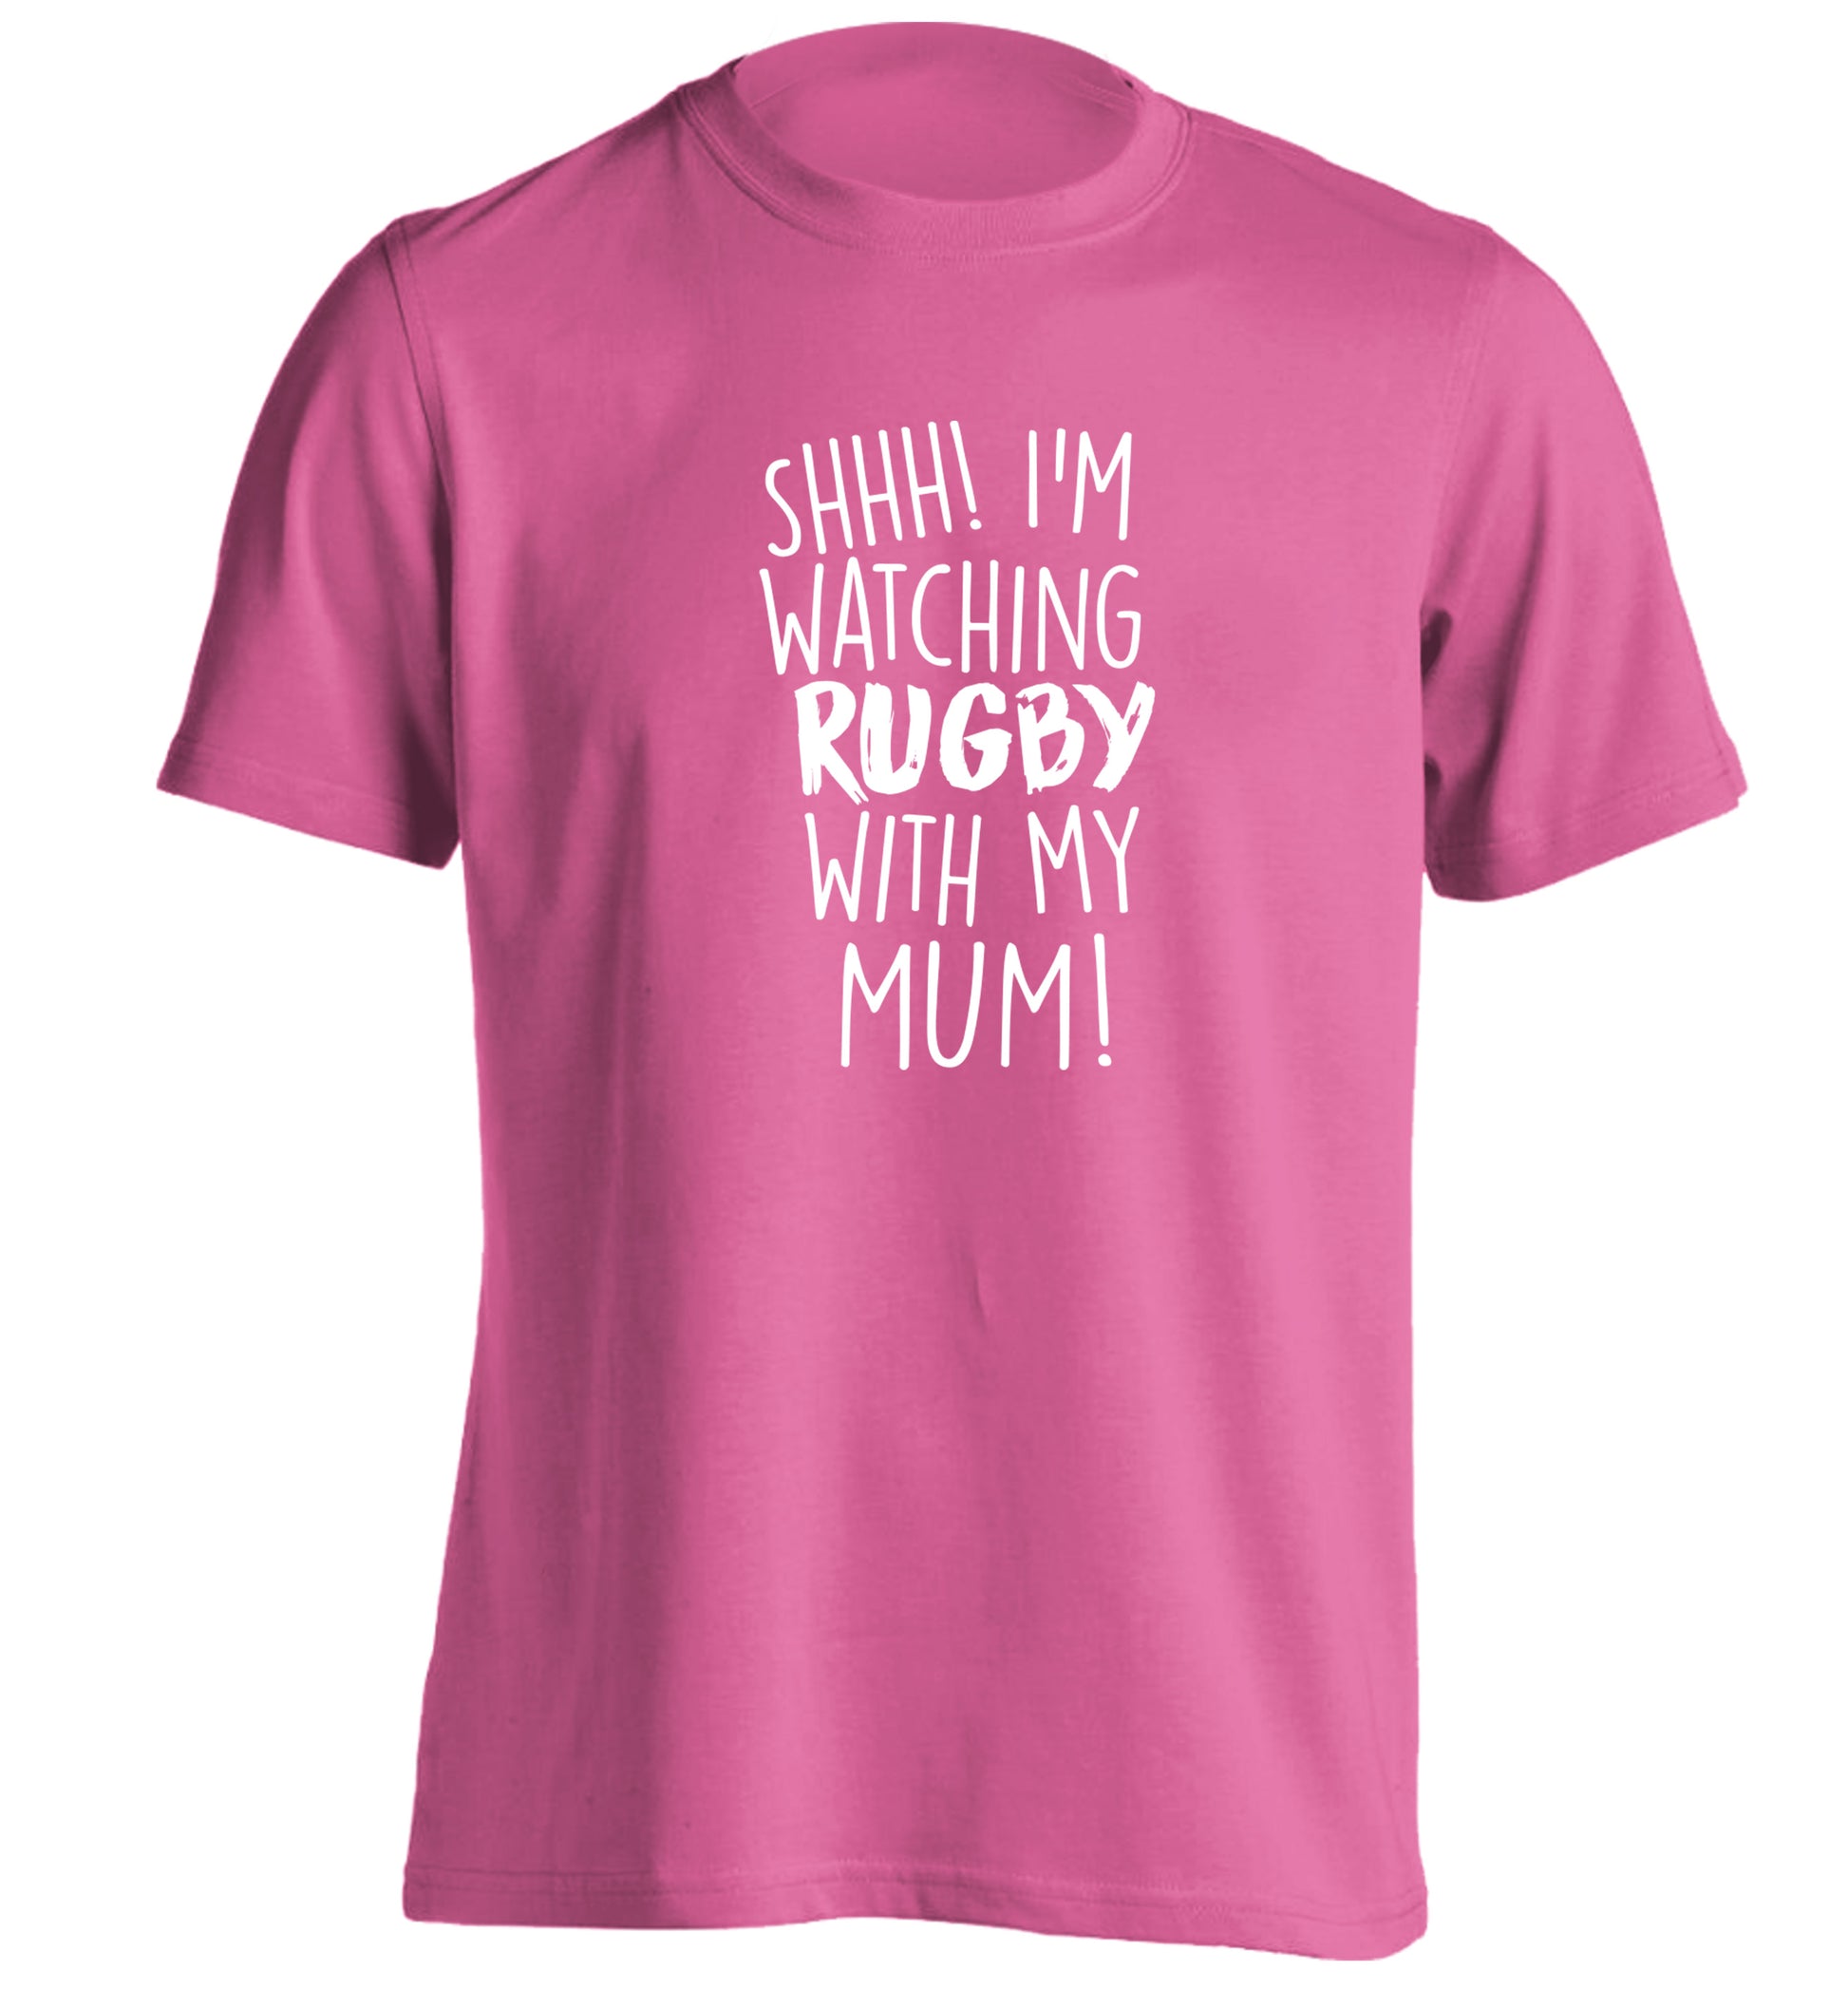 Shh... I'm watching rugby with my mum adults unisex pink Tshirt 2XL